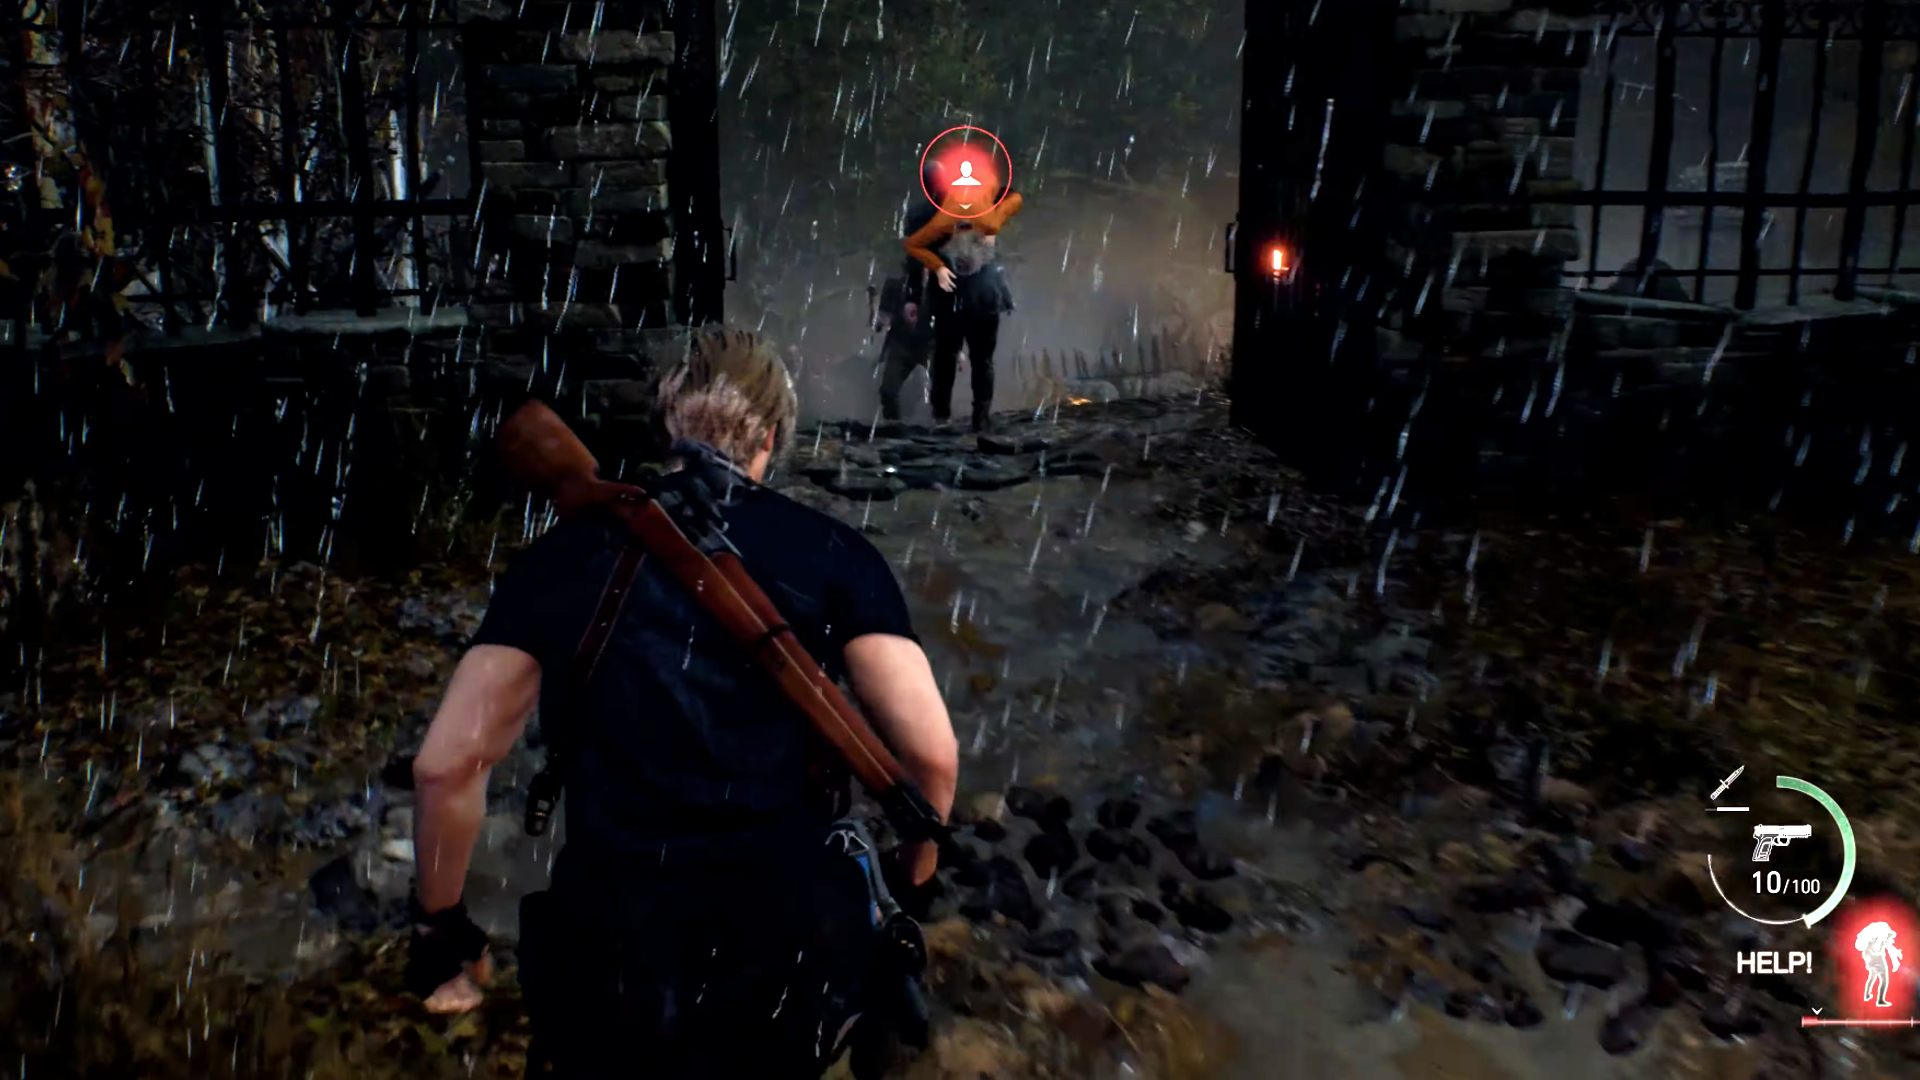 Resident Evil 4 remake finally gets its most highly anticipated DLC